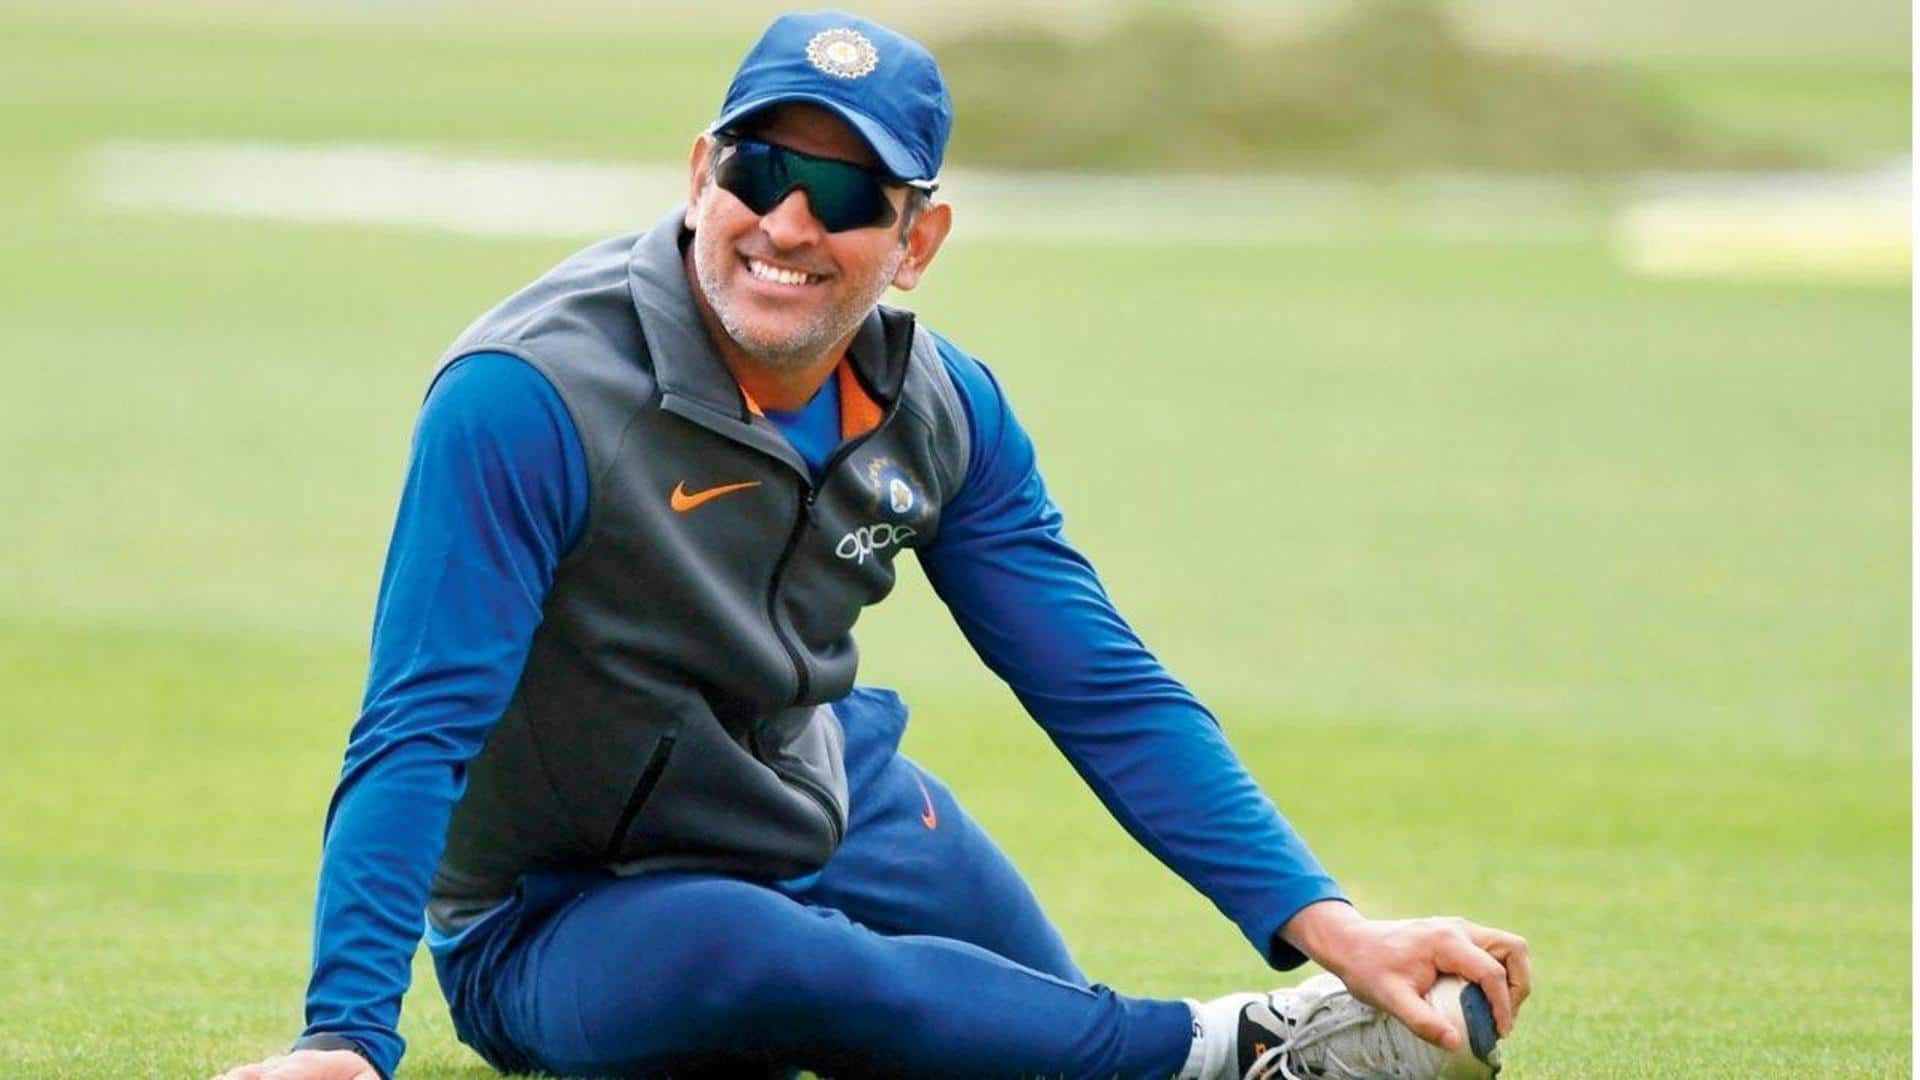 Dhoni to rejoin Team India? He could be their mentor